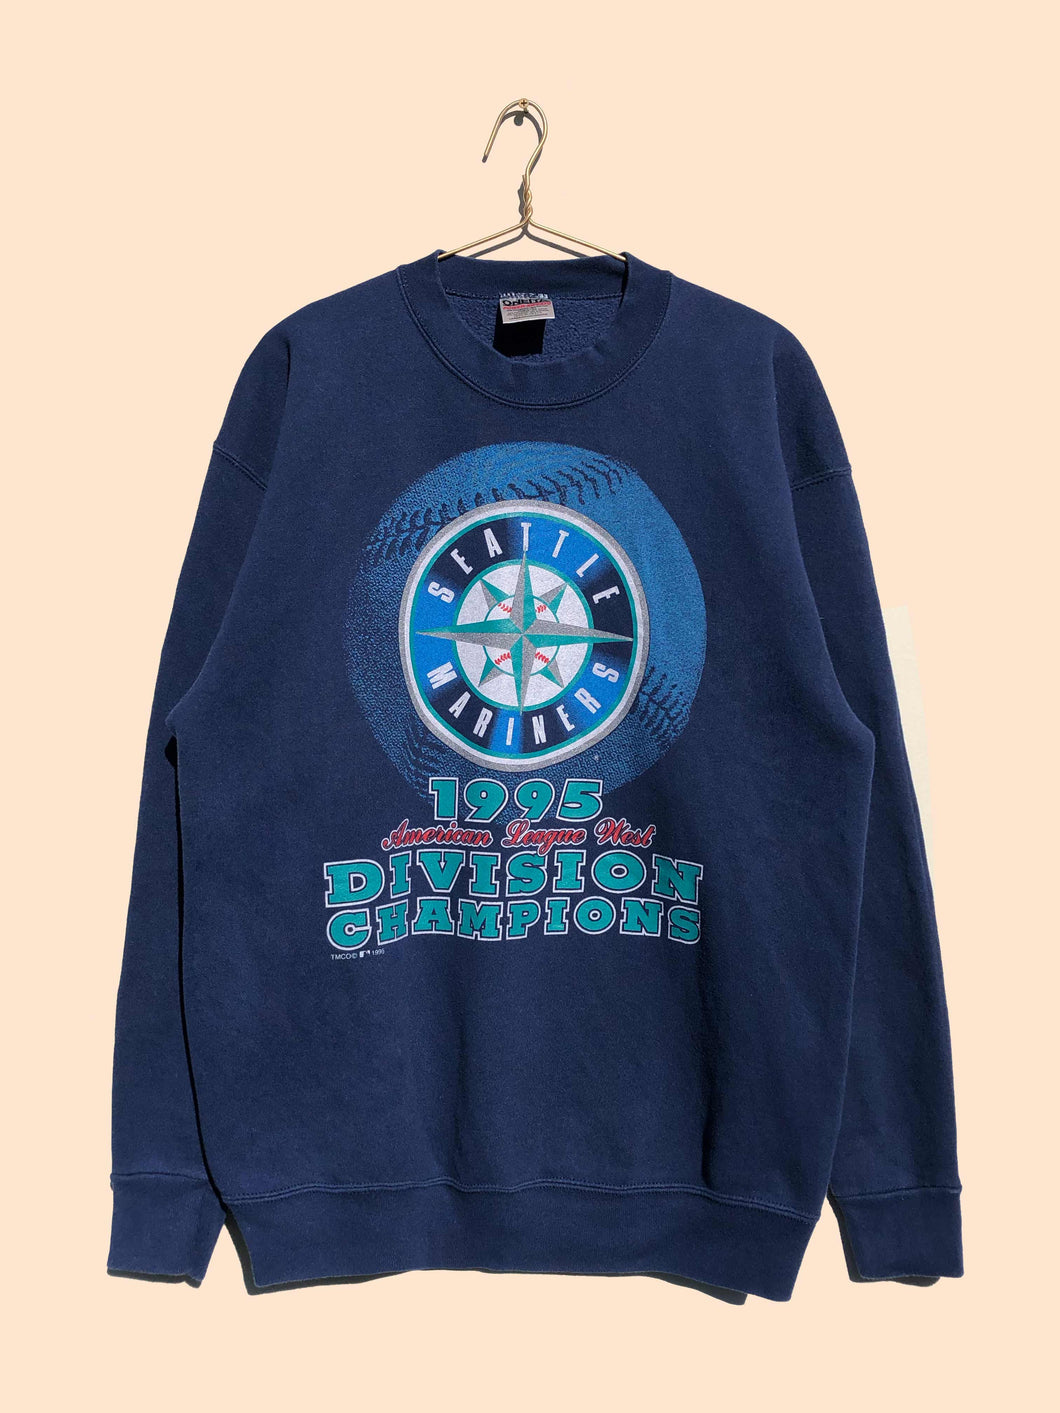 MLB 90's Seattle Mariners Sweater Navy (L)